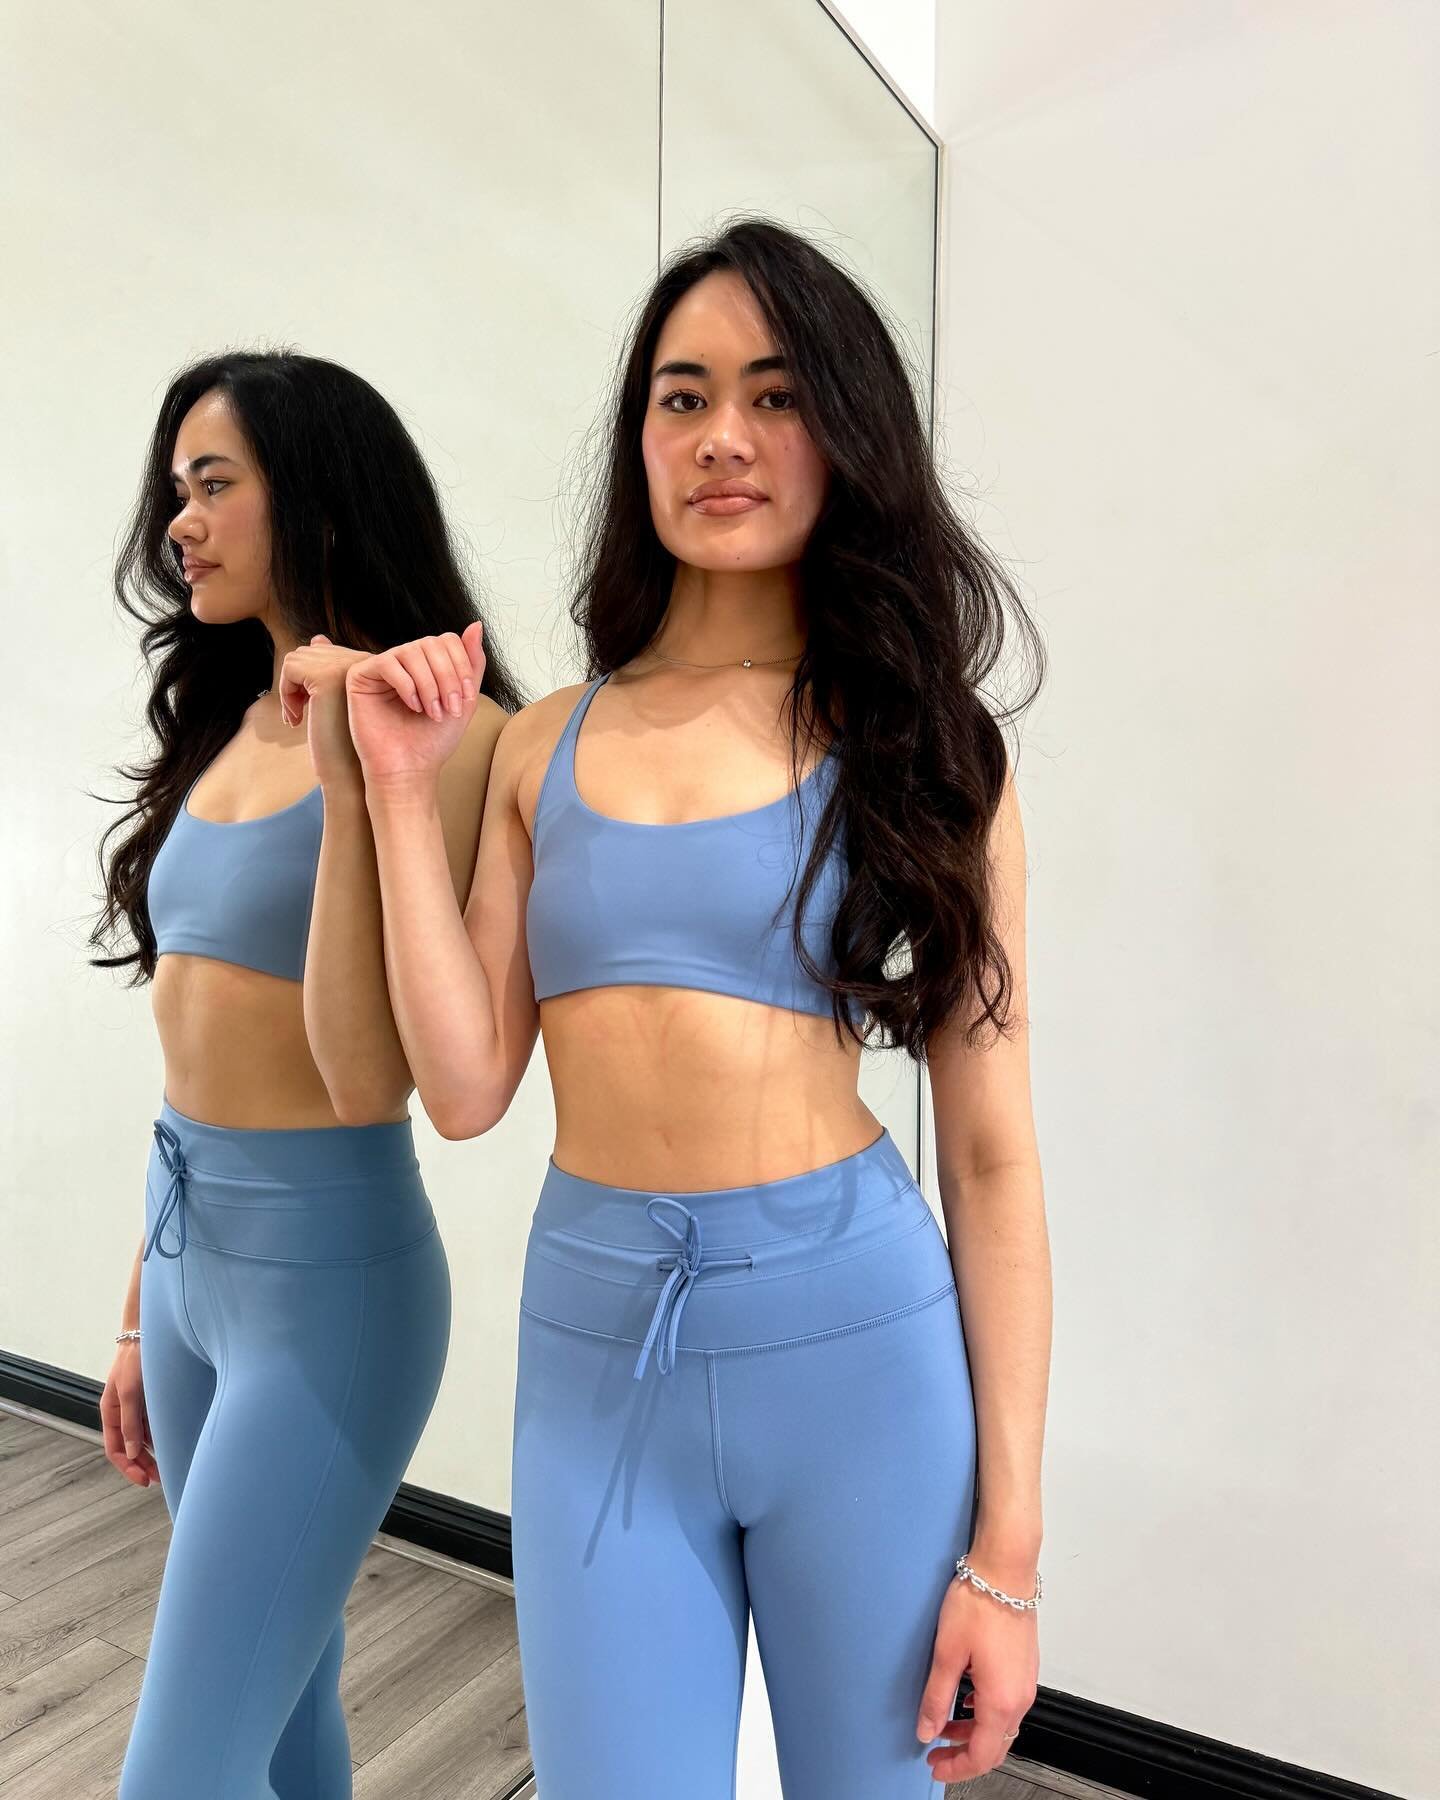 angel vibes 👼🏻 in @vuoriclothing 🩵 from the color to the details, we can&rsquo;t get enough of this set! find this + more in store til 7pm ✨

#vuori #vuoriclothing #vuorioutfit #yogaootd #yogaoutfit